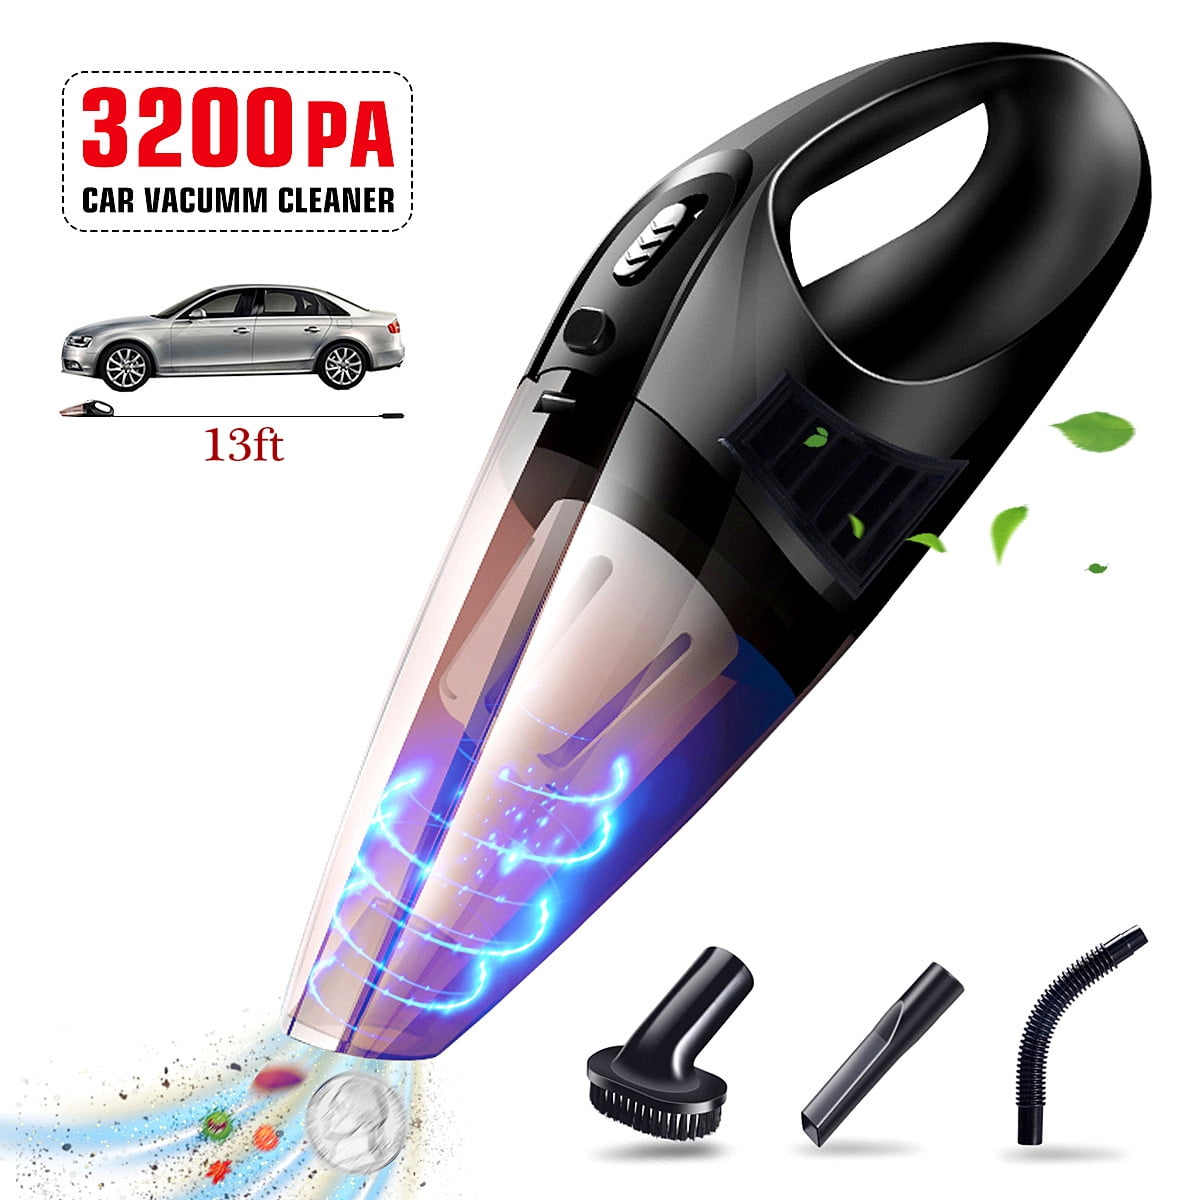 AIICIOO Corded Car Vacuum Handheld High Power for Car Interior Cleaning Kit Portable Low Noise Wet and Dry Use Auto Vacuum Cleaner 12V? 